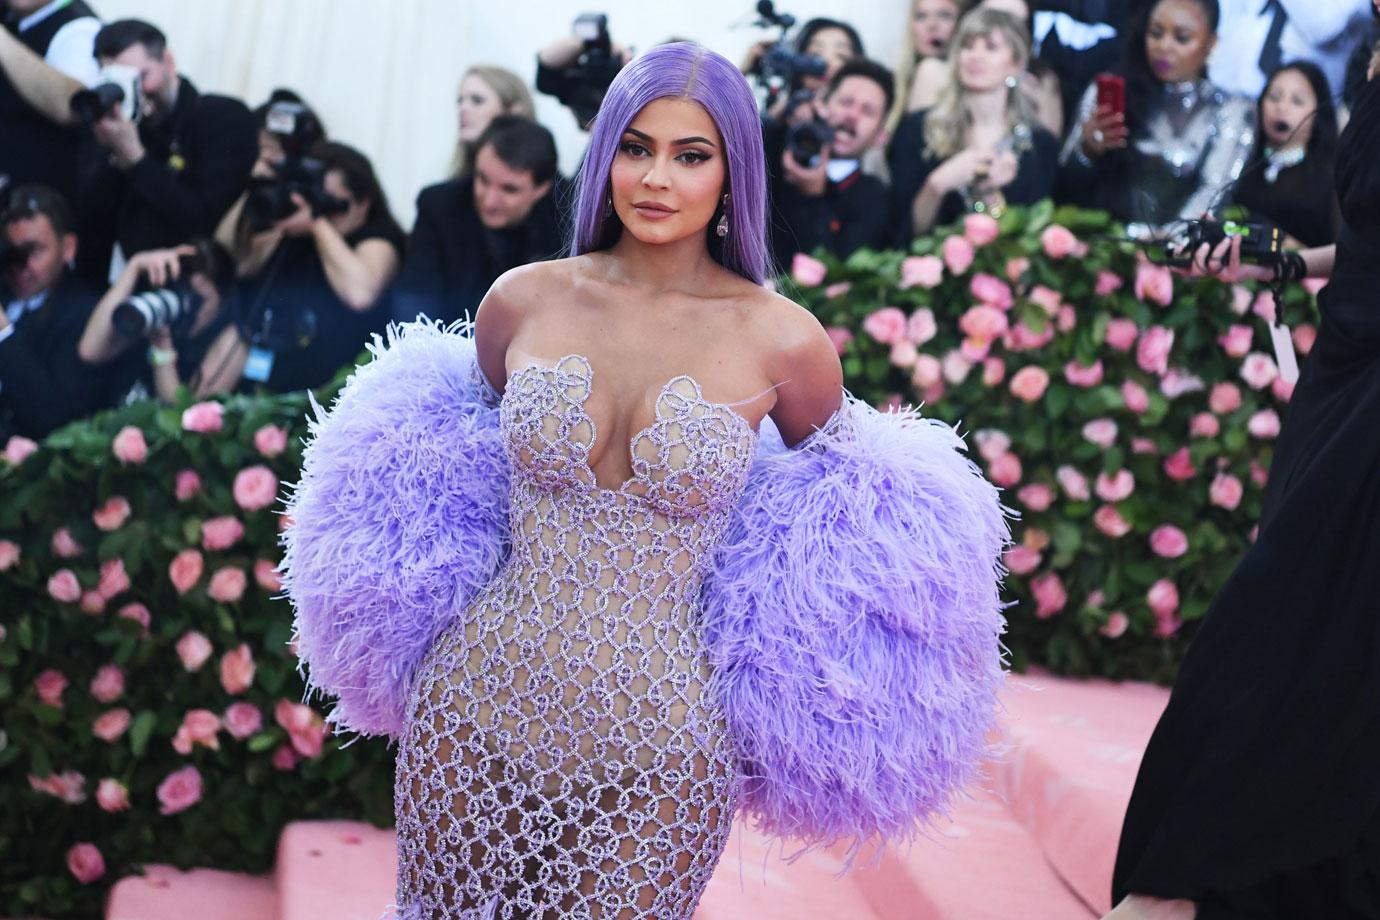 Sexiest Celebrity Costumes Of 2019: Kylie Jenner, Blac Chyna